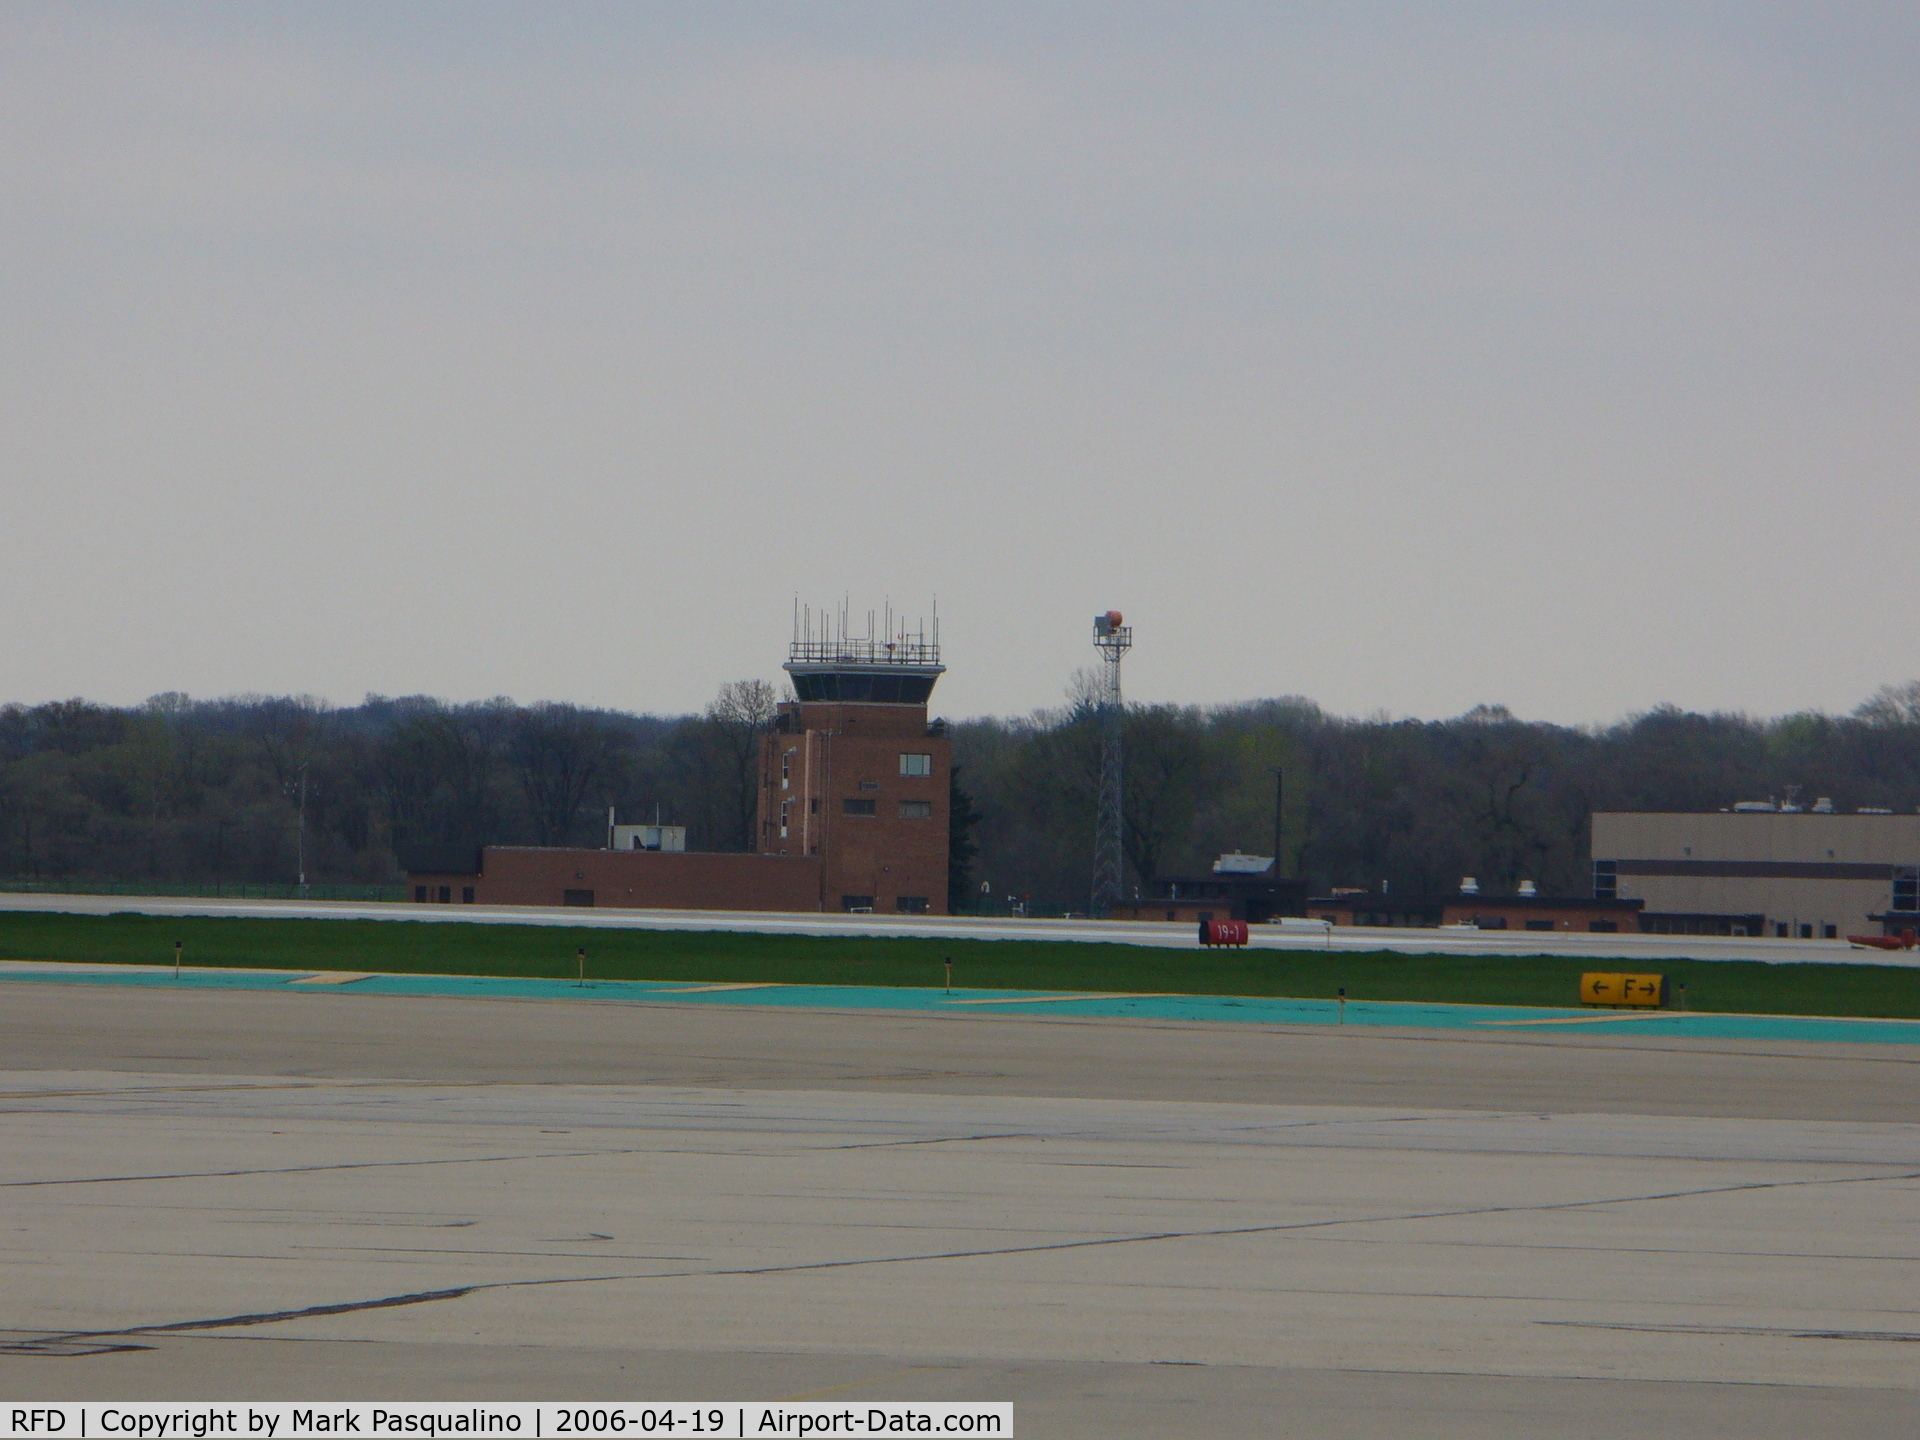 Chicago/rockford International Airport (RFD) - Control Tower